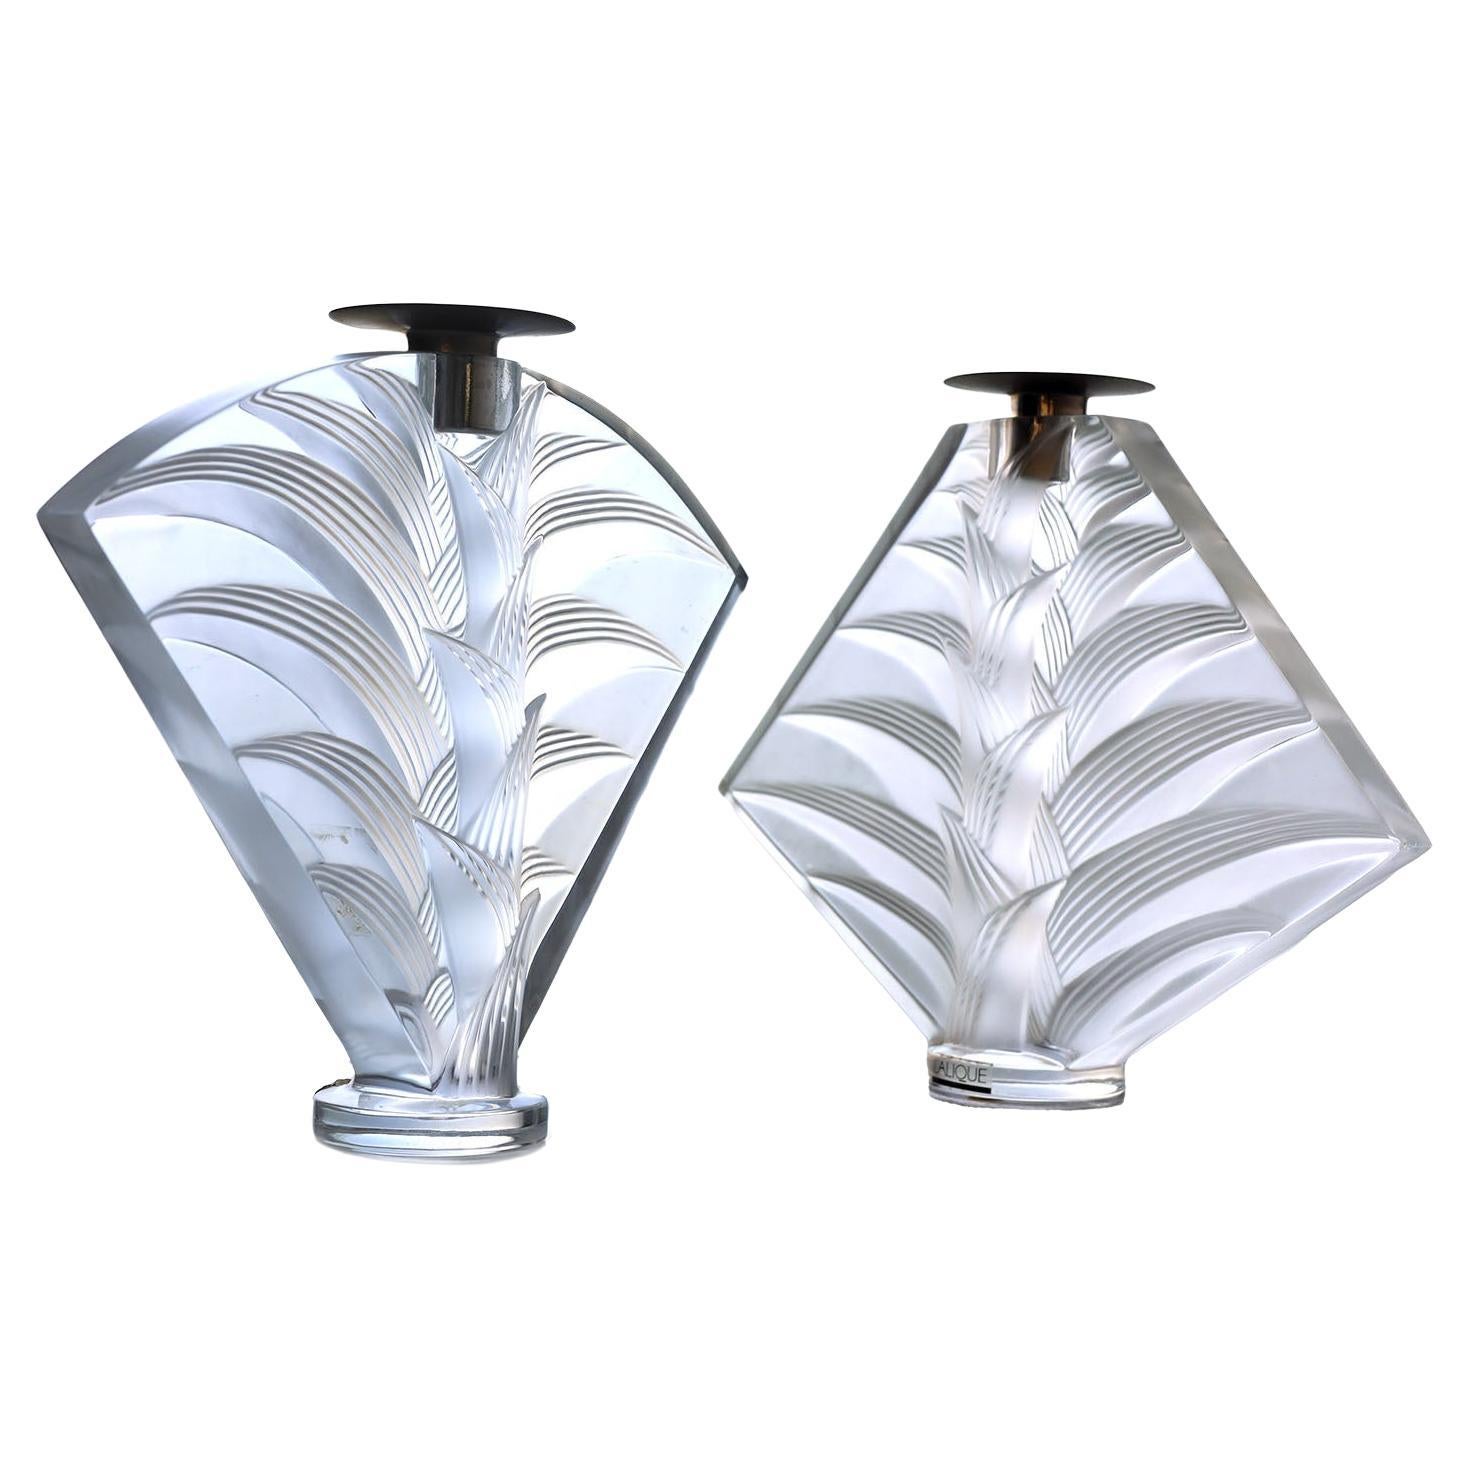 Lalique Pair of " Ravelana" Candle Holders For Sale